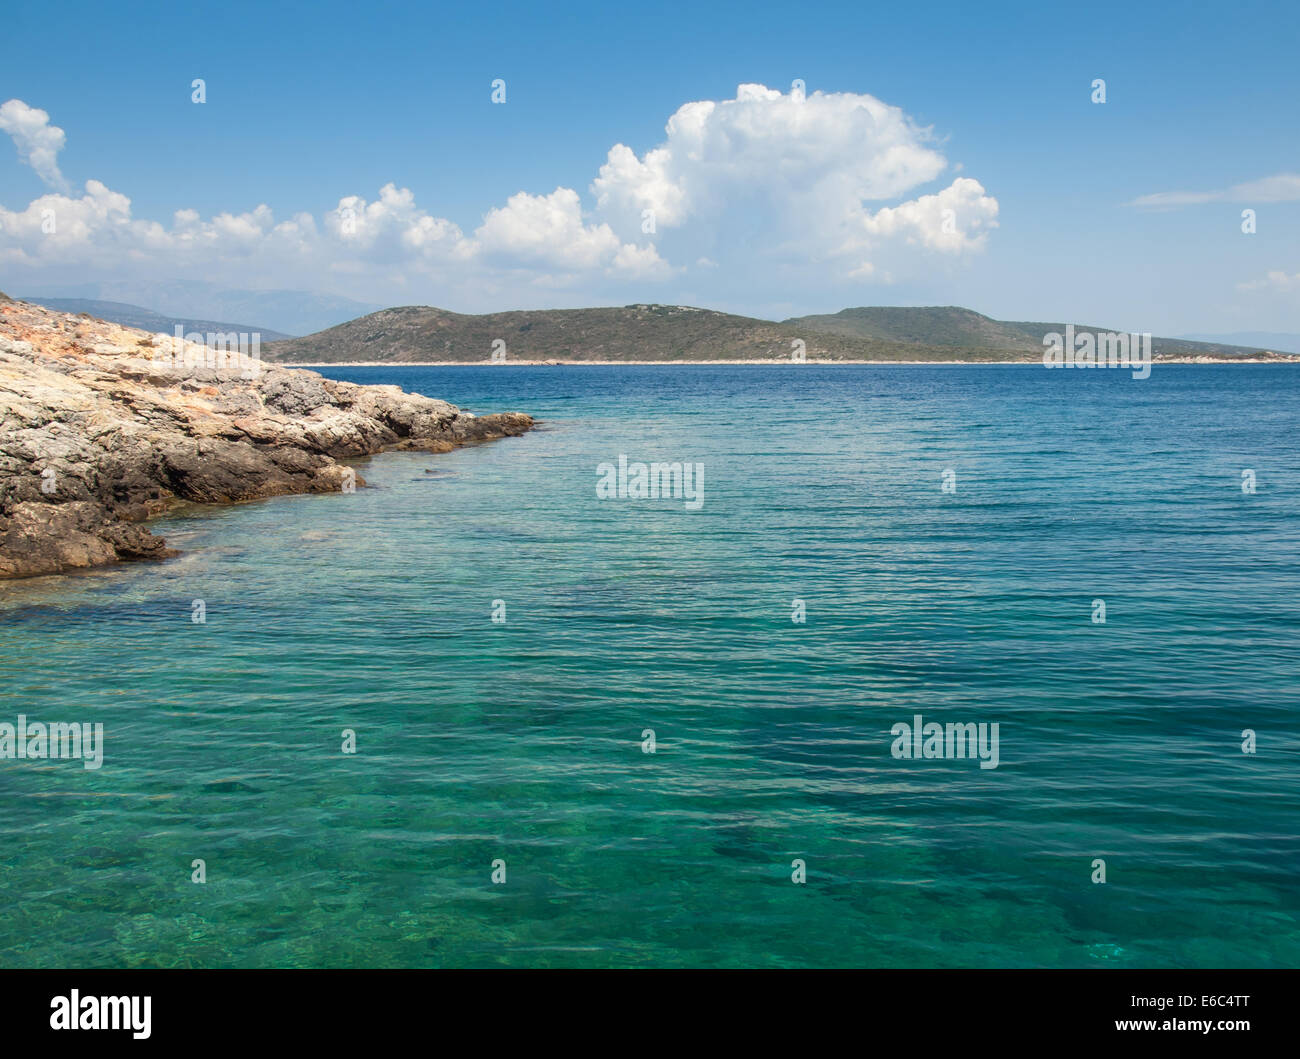 rocky coastline with green sea, blue sky and hills behind Stock Photo